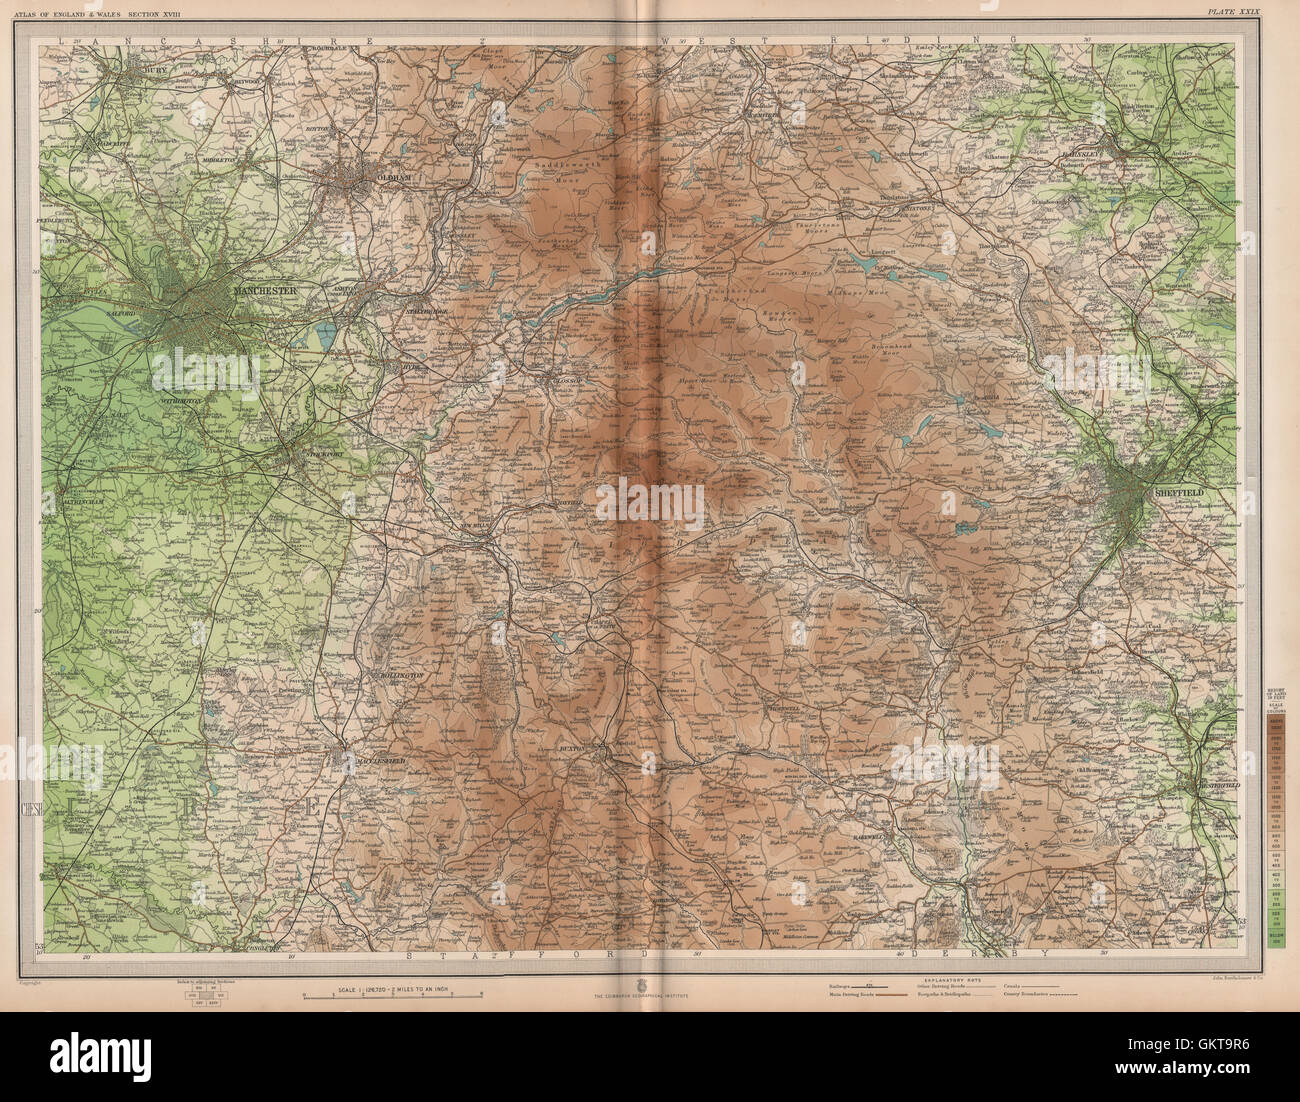 Il Peak District. Manchester Sheffield Chesterfield Ches Yorks Derbys, 1903 Mappa Foto Stock